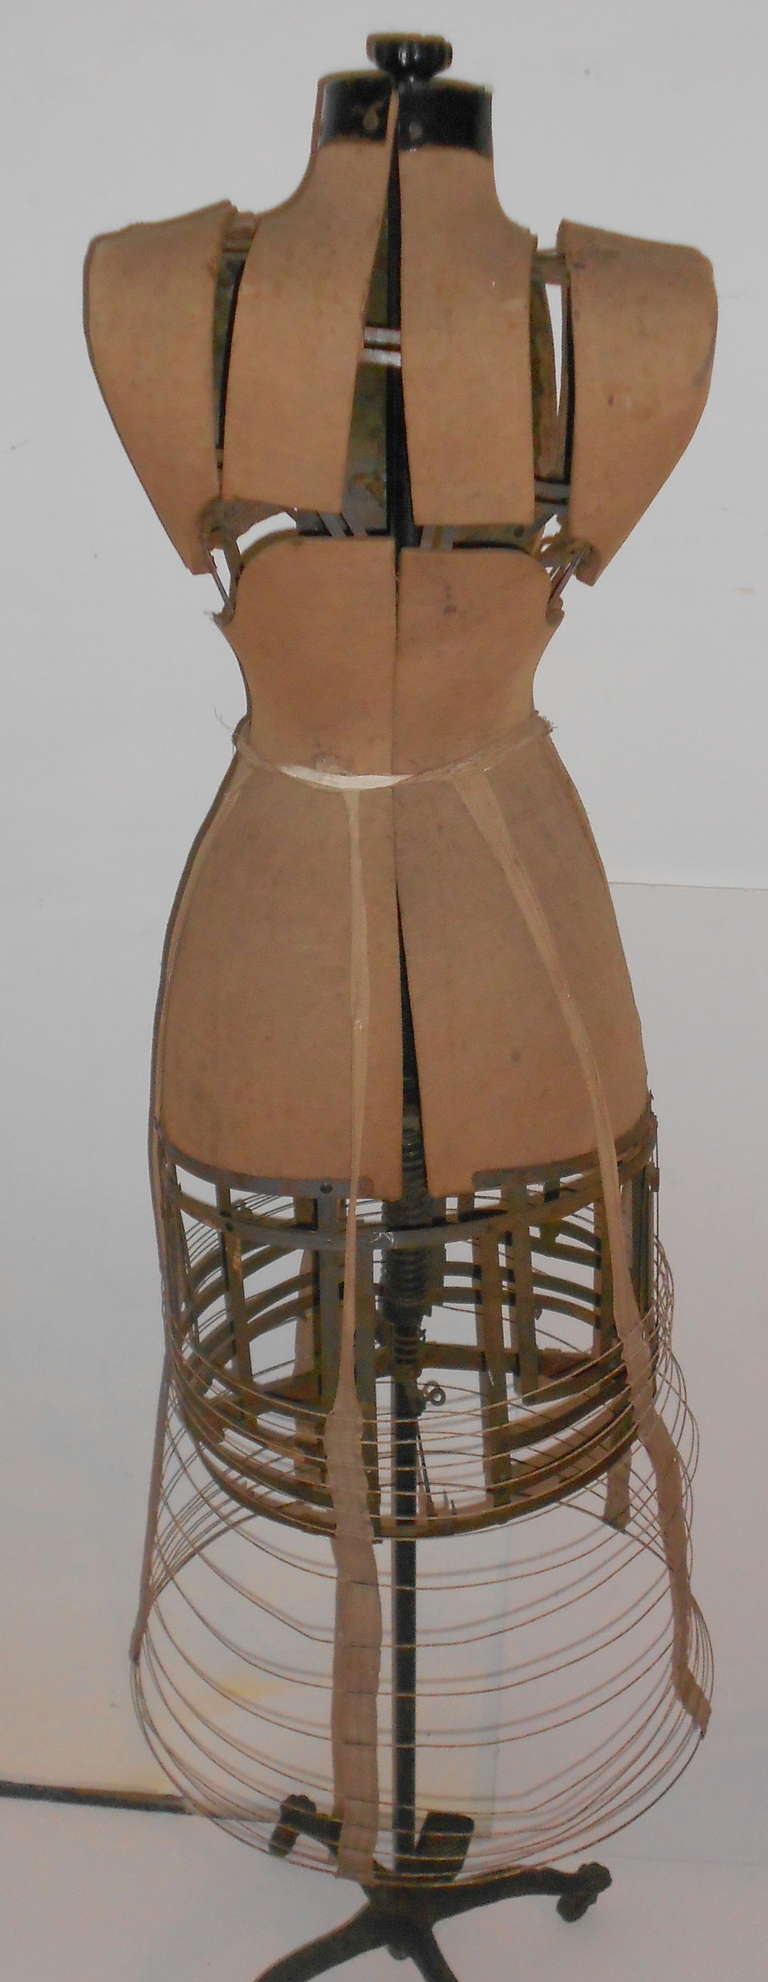 Fabric Early 20th century dress form from New York City